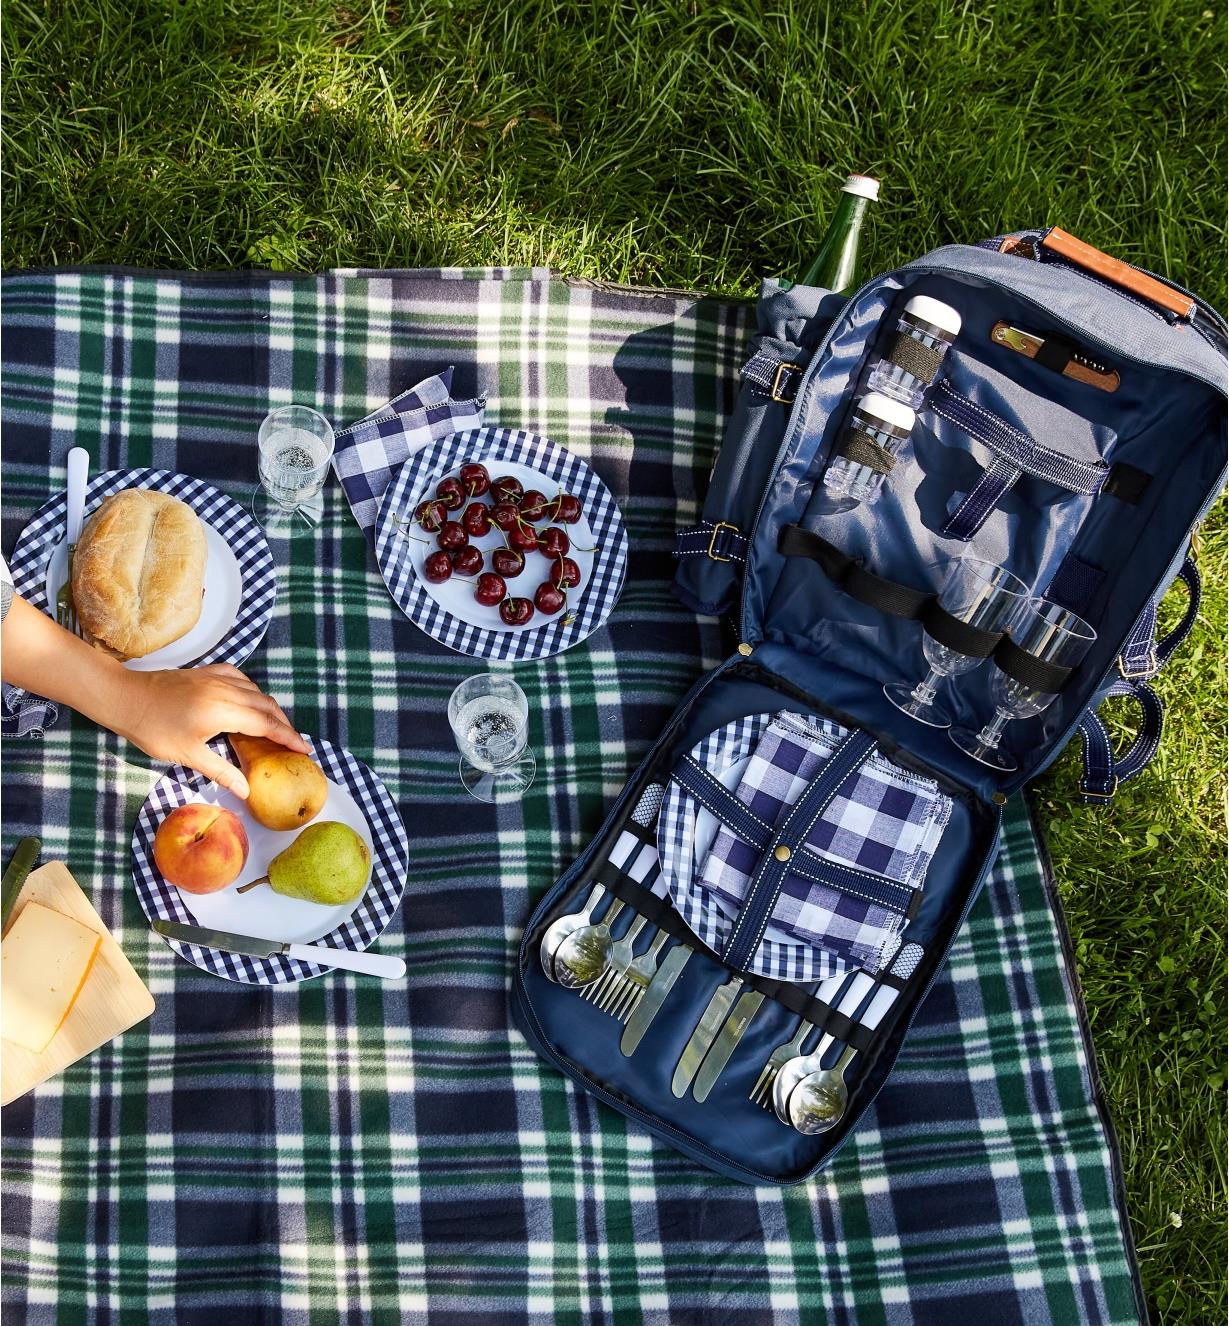 Components of the deluxe picnic backpack laid out in readiness for a picnic meal